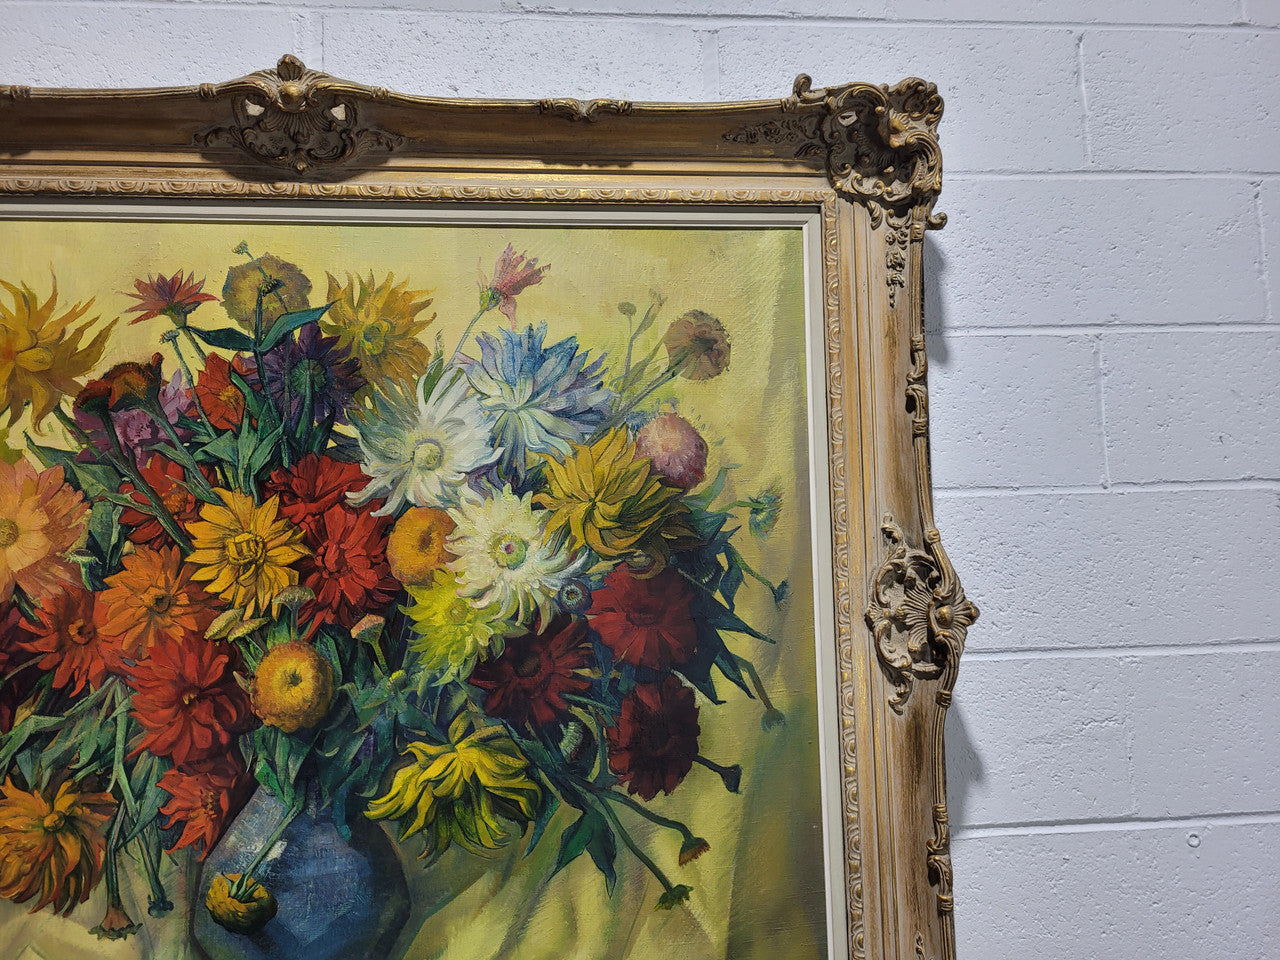 Large vibrant French oil on canvas of flowers and signed “Y.Fonteyn". In an amazing gilt frame and is in good original condition.